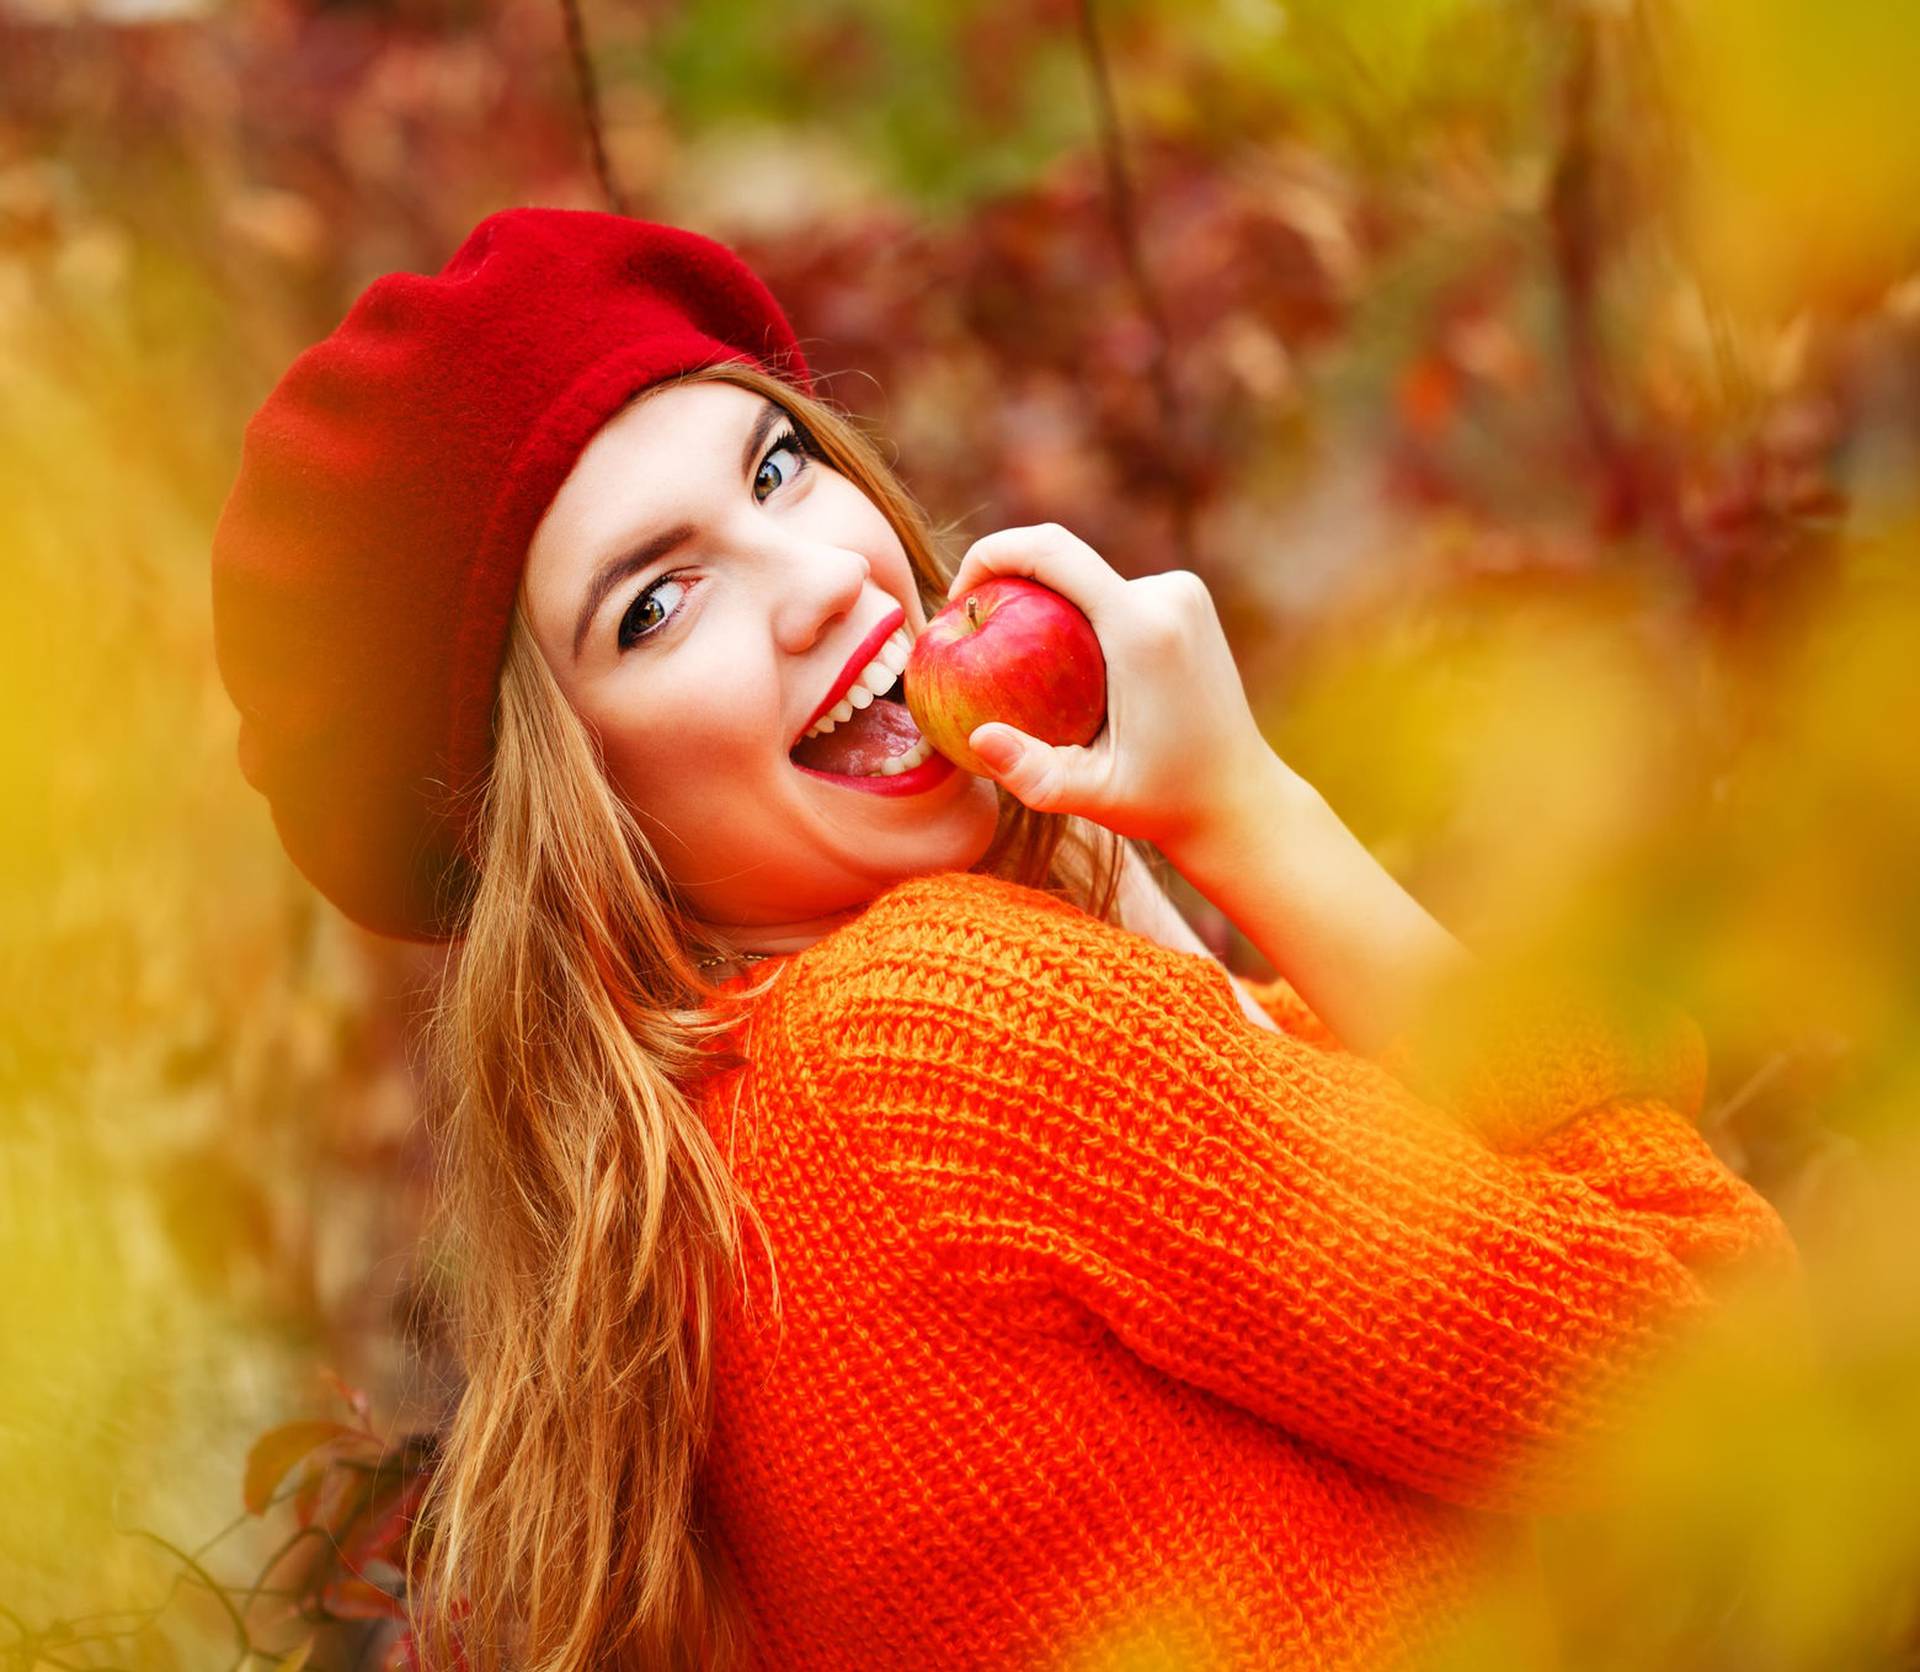 Lovely girl in beret and sweater, holding ripe apple and smiling